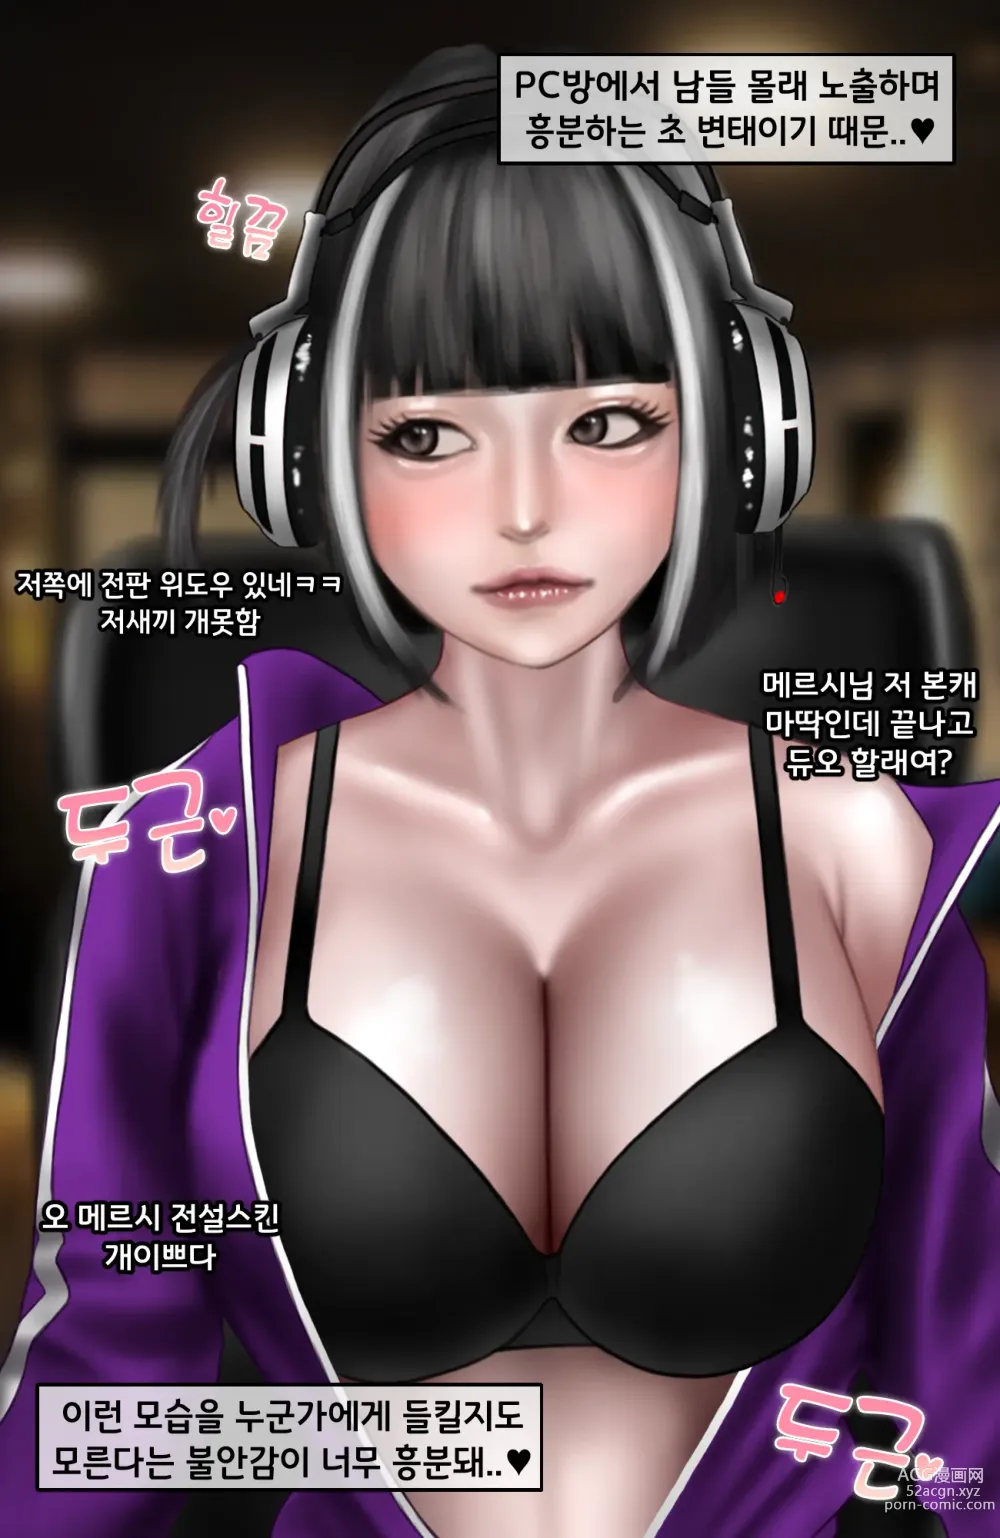 Page 8 of doujinshi PC방 노출녀.1 /Pc Cafe 1